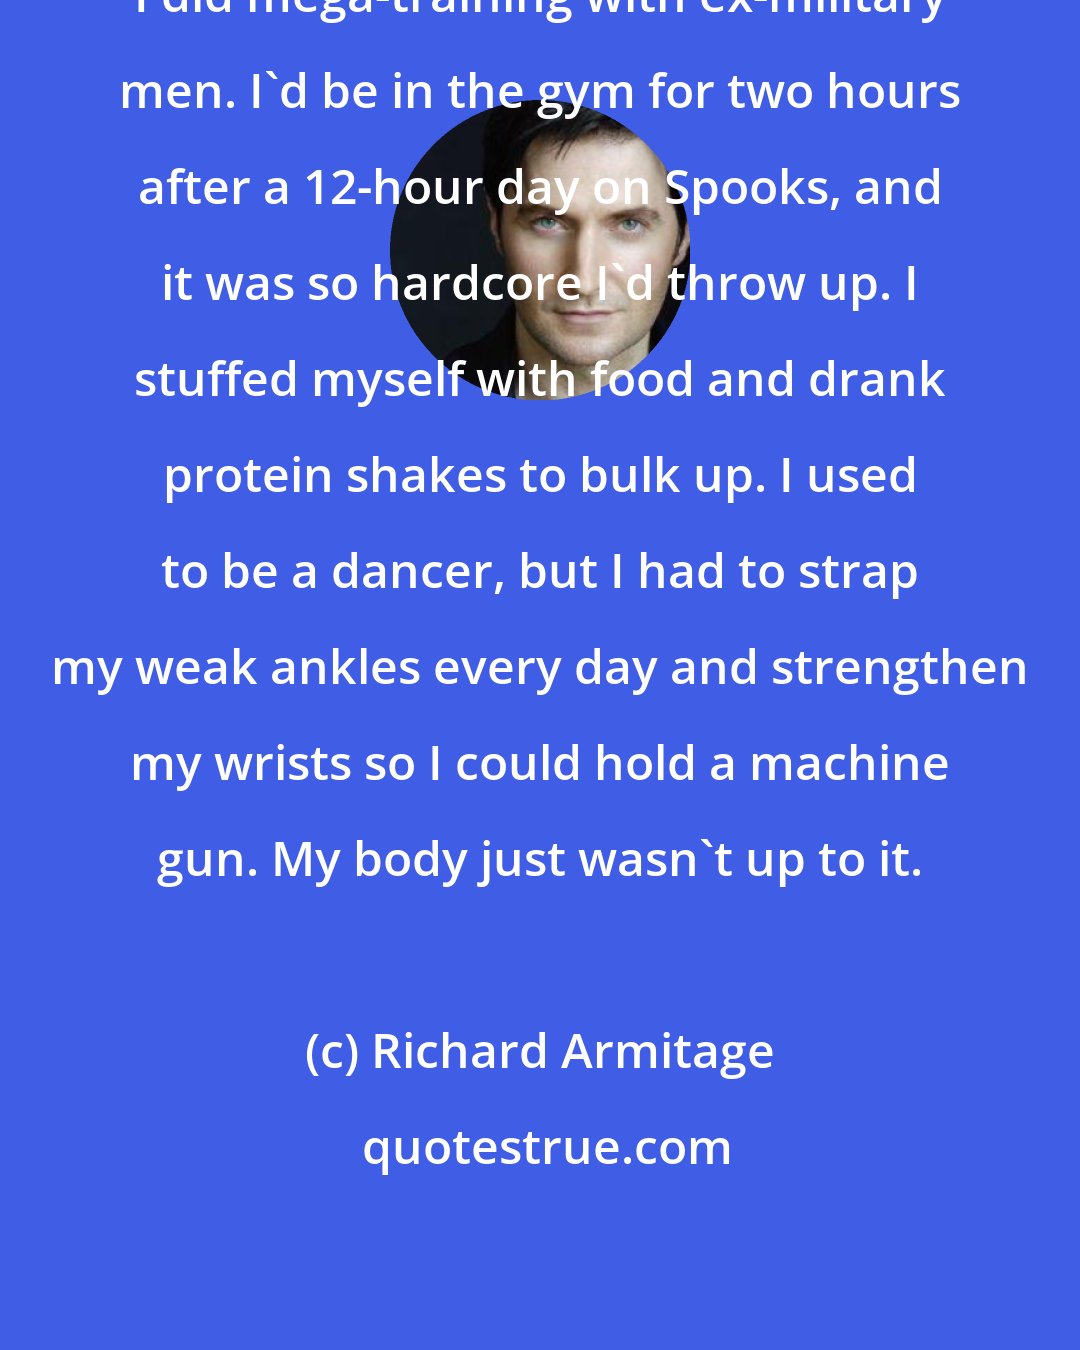 Richard Armitage: I did mega-training with ex-military men. I'd be in the gym for two hours after a 12-hour day on Spooks, and it was so hardcore I'd throw up. I stuffed myself with food and drank protein shakes to bulk up. I used to be a dancer, but I had to strap my weak ankles every day and strengthen my wrists so I could hold a machine gun. My body just wasn't up to it.